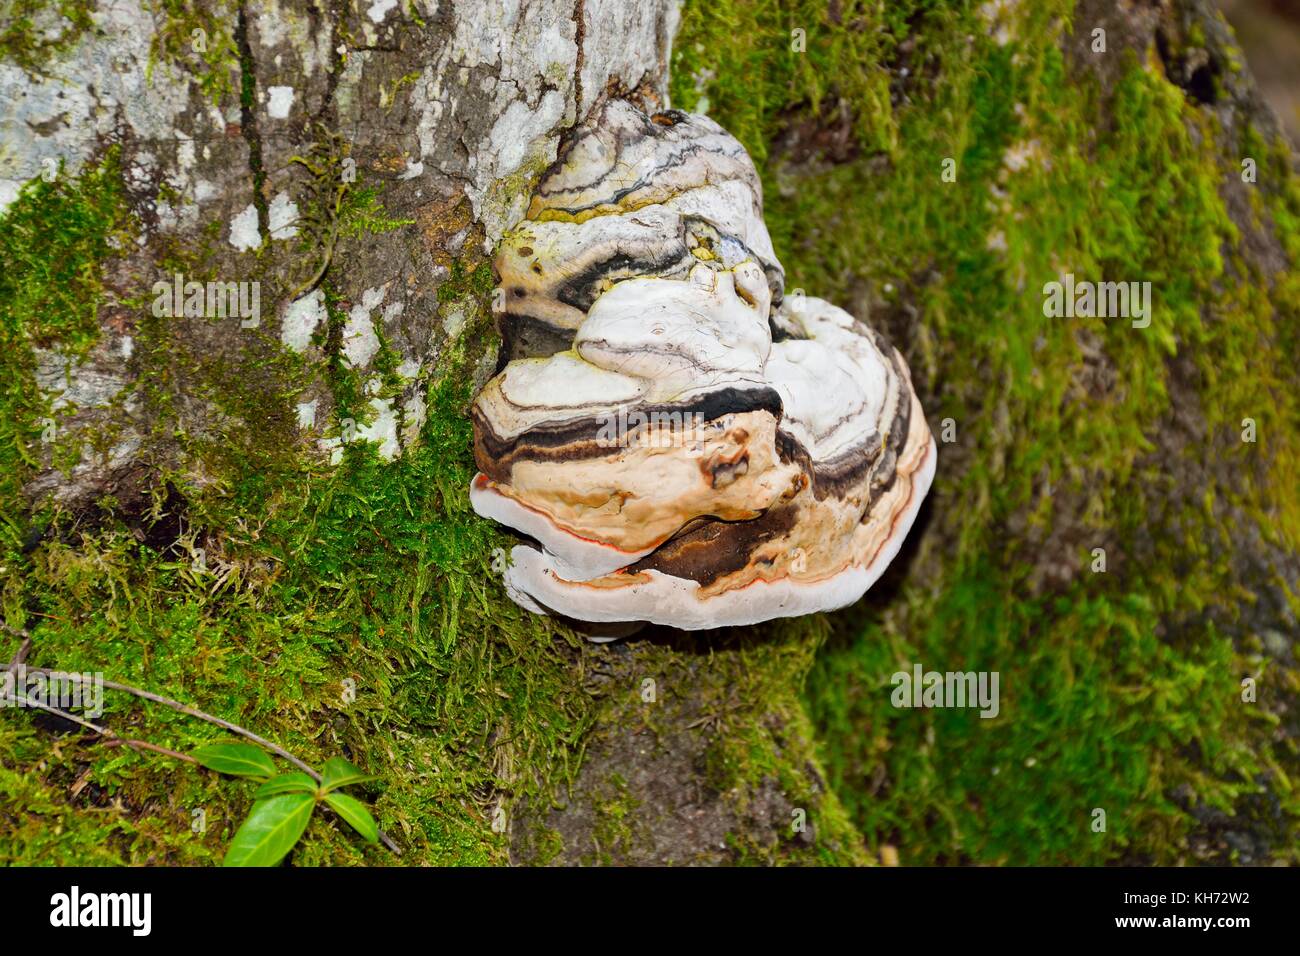 mushroom on a tree stump covered by moss Stock Photo